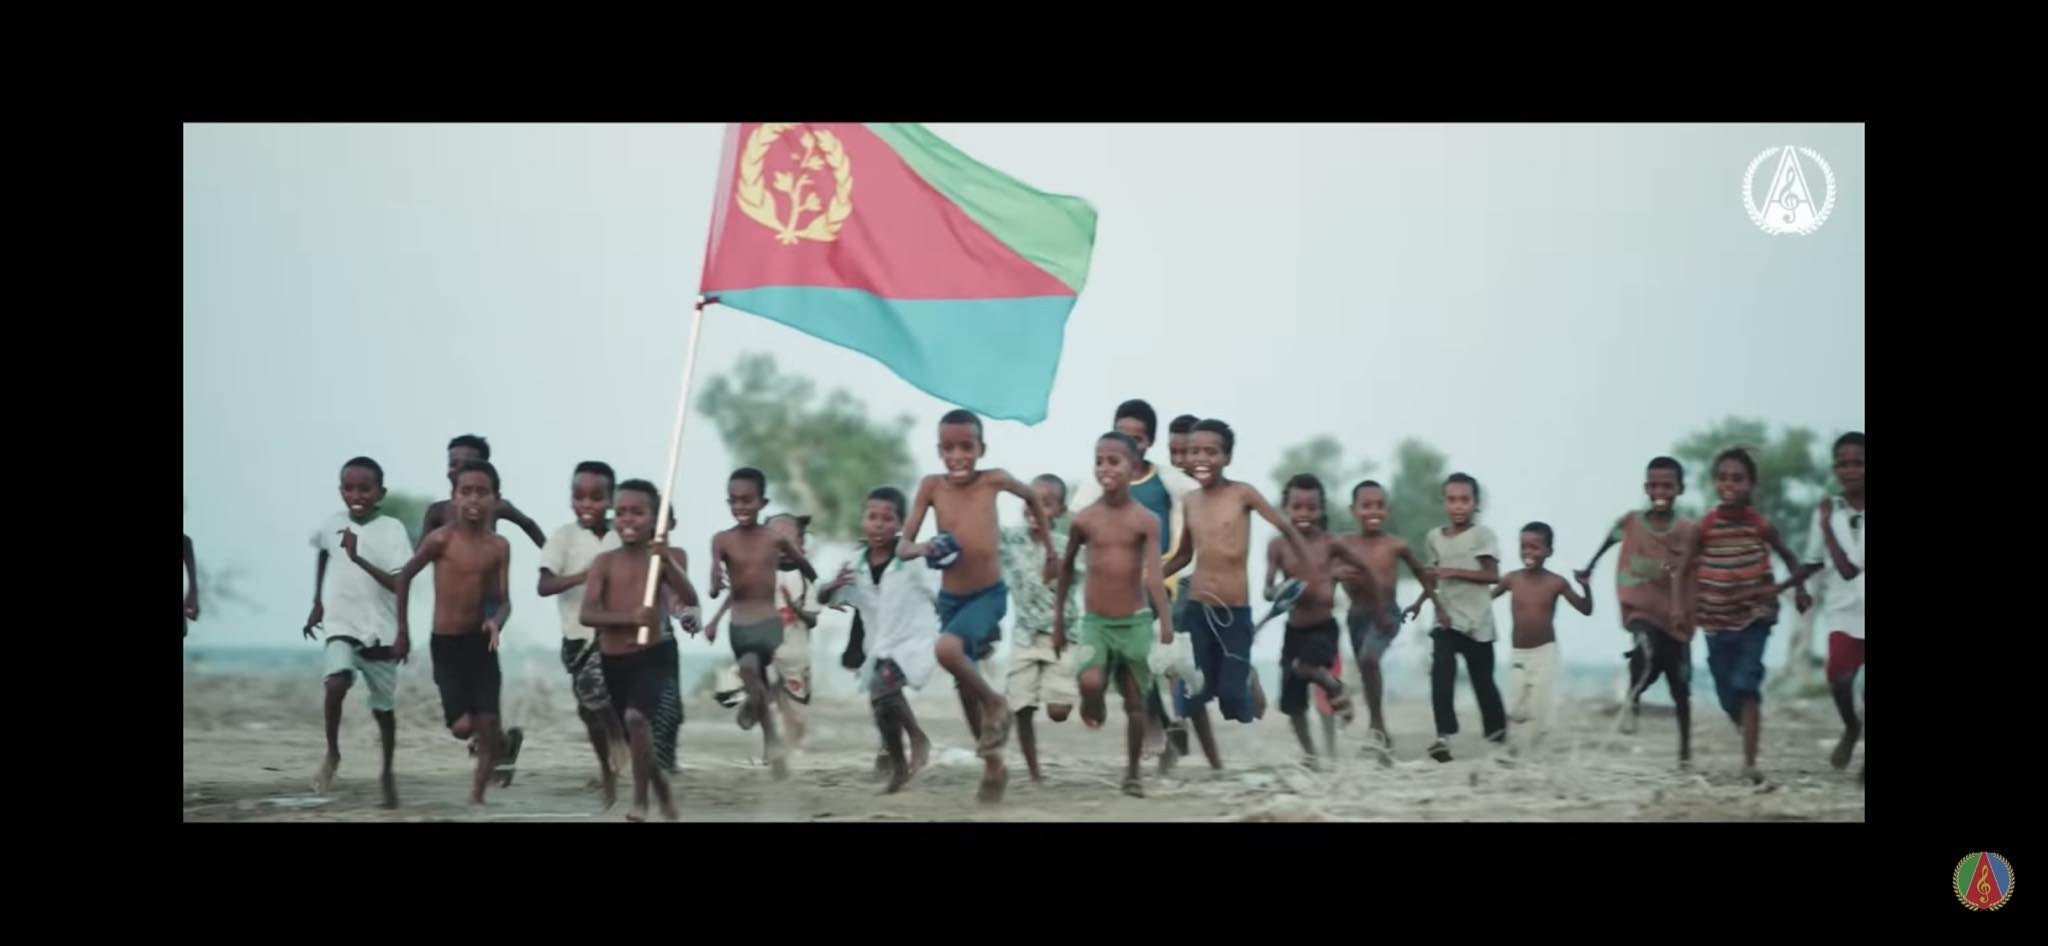 A group of Eritrean children running with the Eritrean flag - learning self-determination